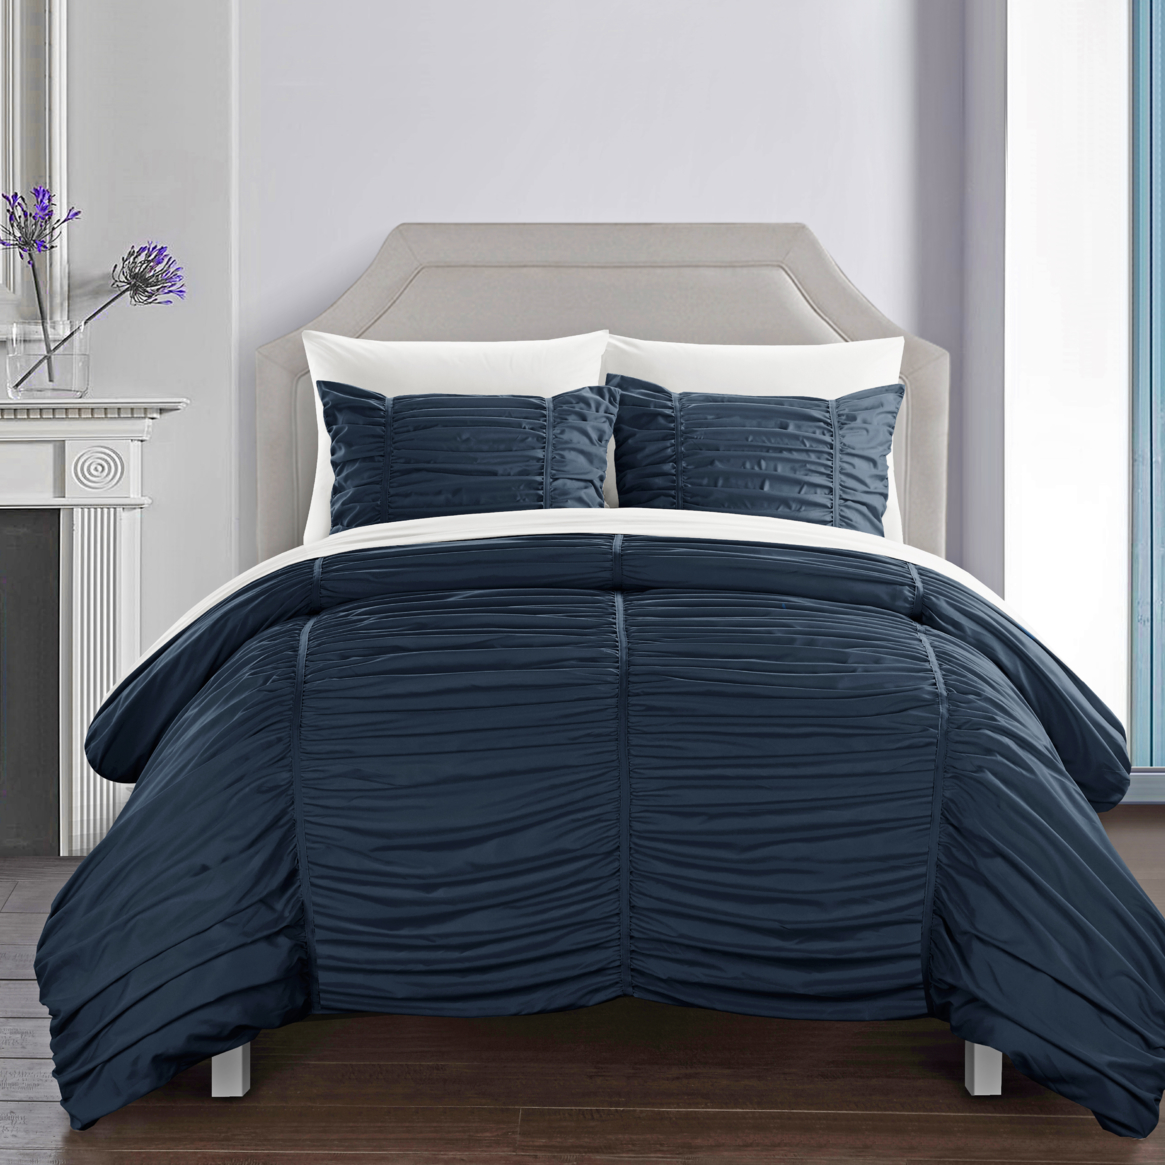 Kleia 7 Or 5 Piece Comforter Set Contemporary Striped Ruched Ruffled Design Bed In A Bag - Navy, Twin